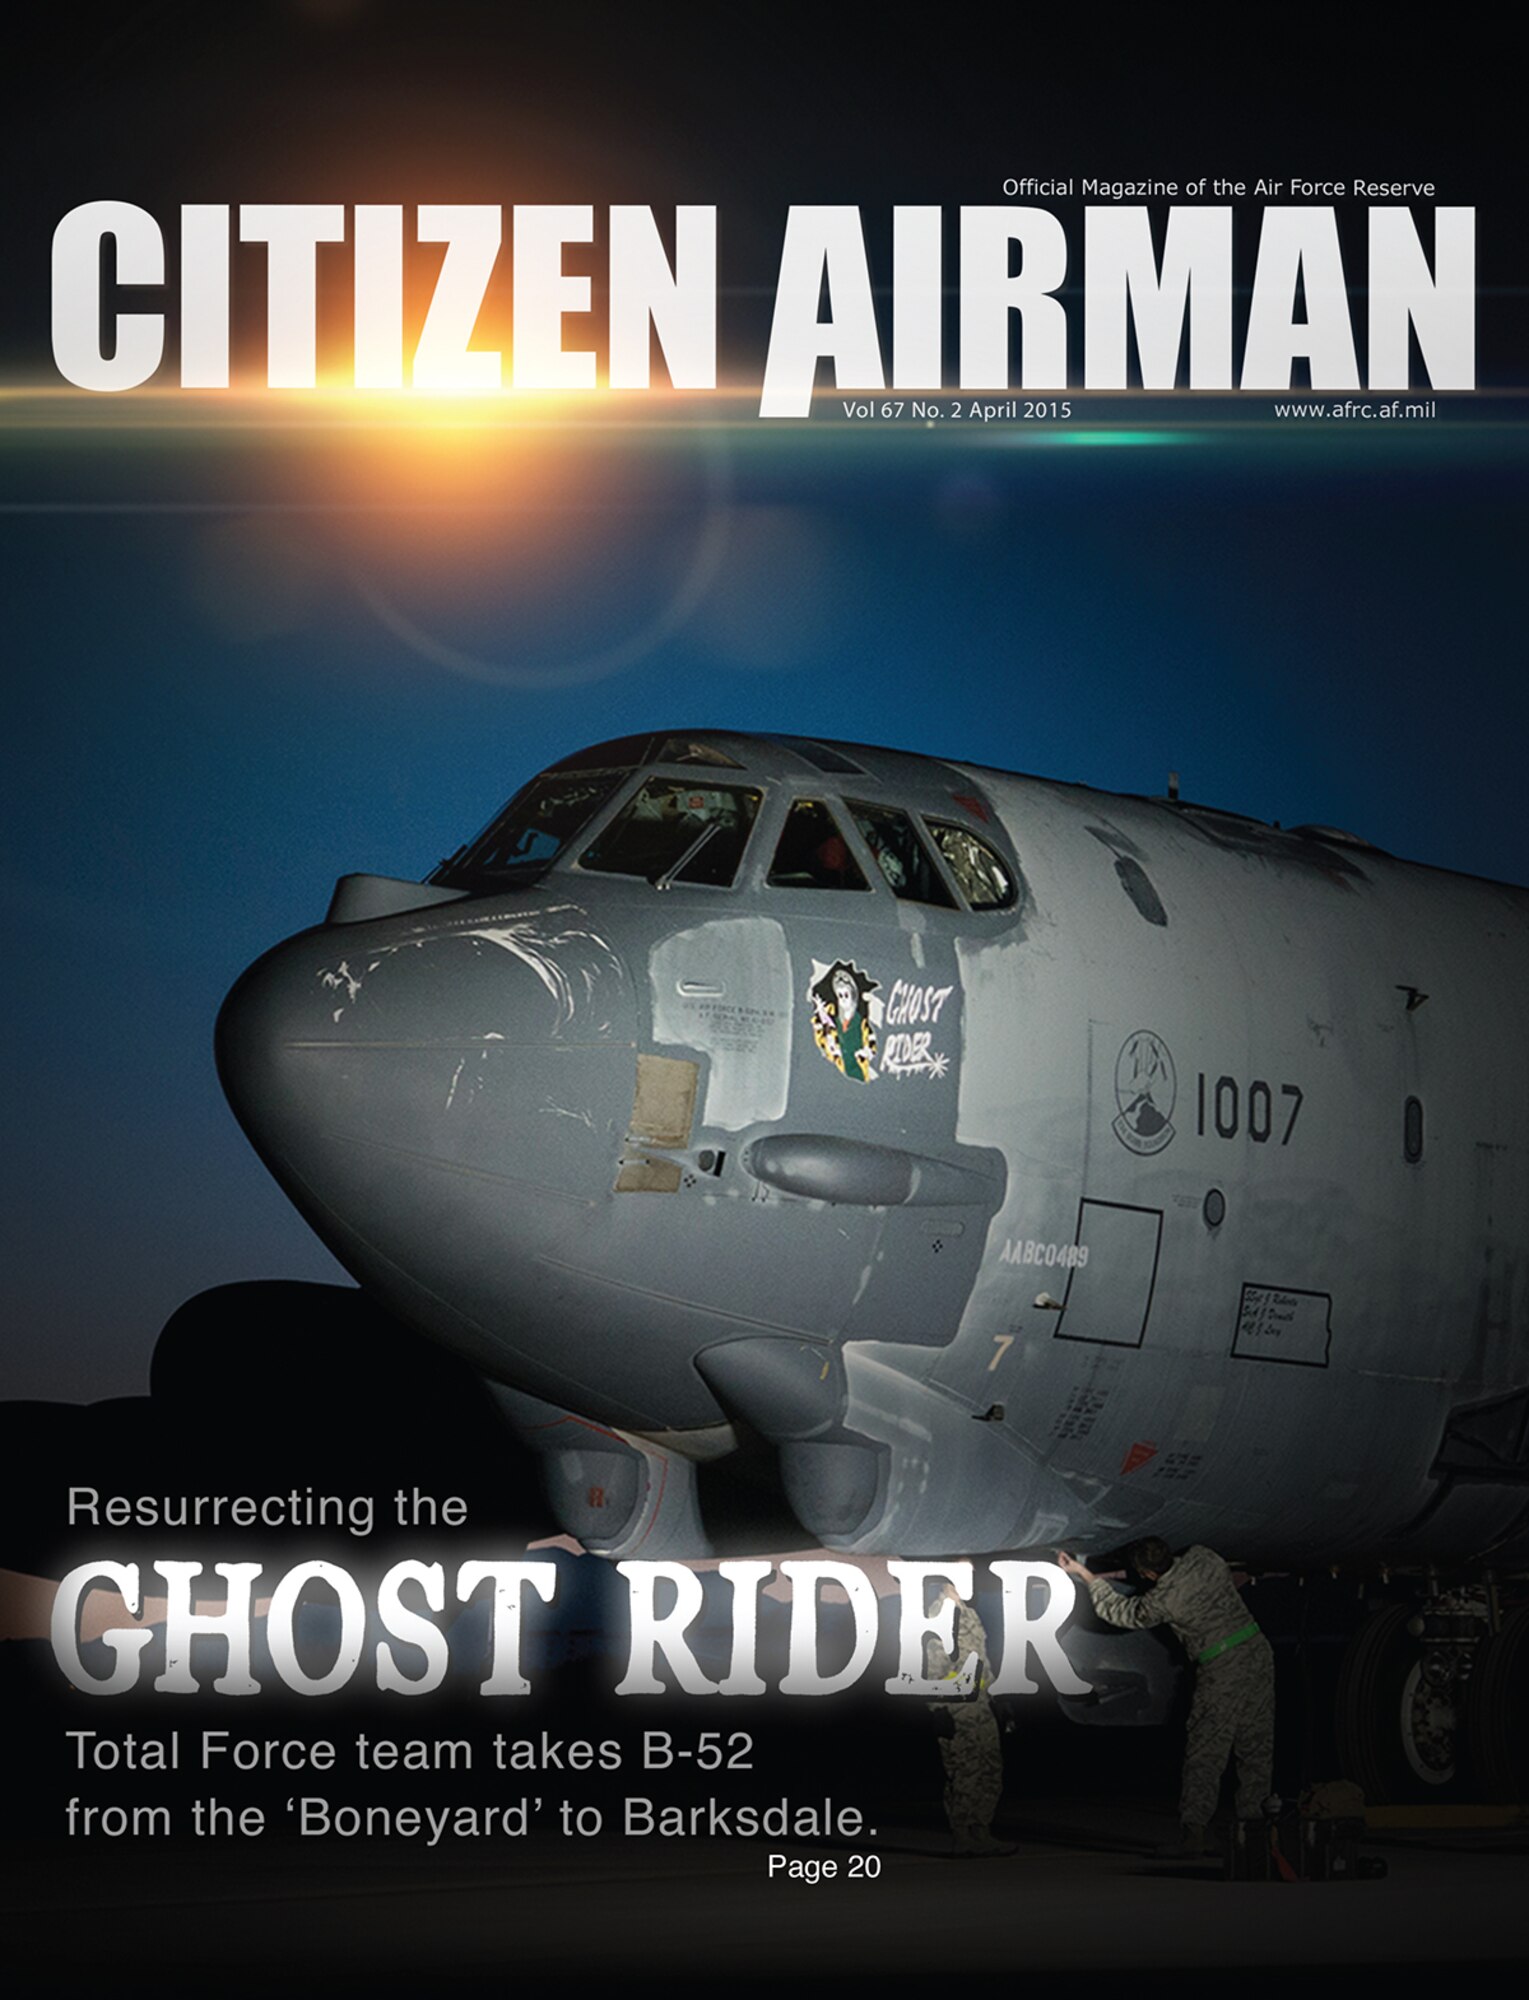 The April issue of Citizen Airman is available online. The cover story features a Total Force team that included members of the 307th Aircraft Maintenance Squadron from
Barksdale Air Force Base, Louisiana, working to bring a B-52 out of retirement at the Air Force "Boneyard" back into active service. The lead story, by Staff Sgt. Kelly Goonan, focuses on rescue Reservists from Patrick Air Force Base, Florida, engaging in realistic training at a state-of-the-art facility in Georgia. Read more at http://www.citamn.afrc.af.mil. 
